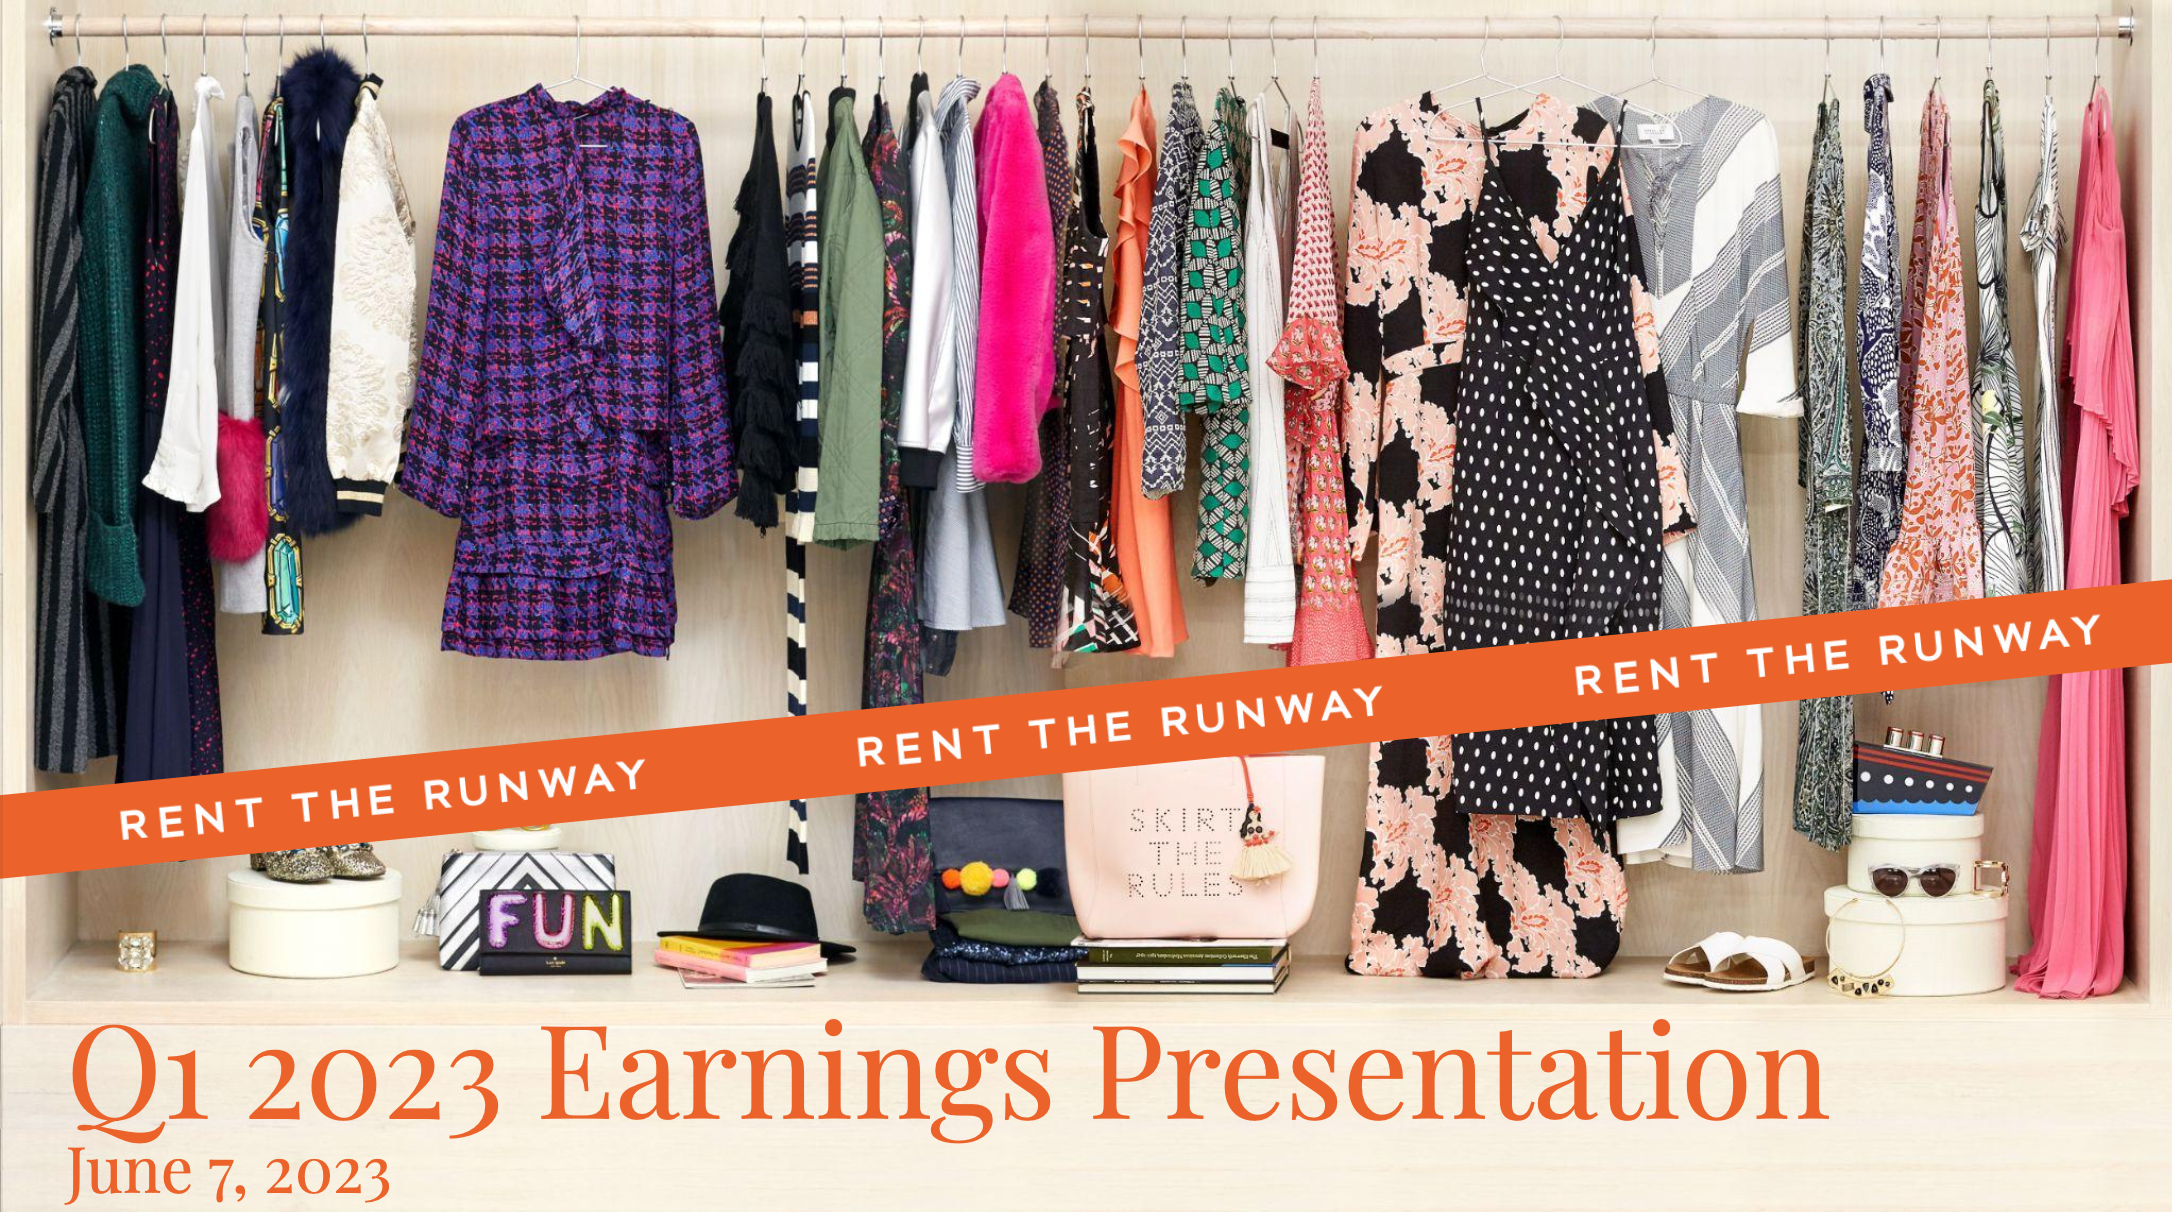 Rent the Runway: EBITDA Turns Profitable, Exceeding Expectations with 11% YoY Revenue Growth